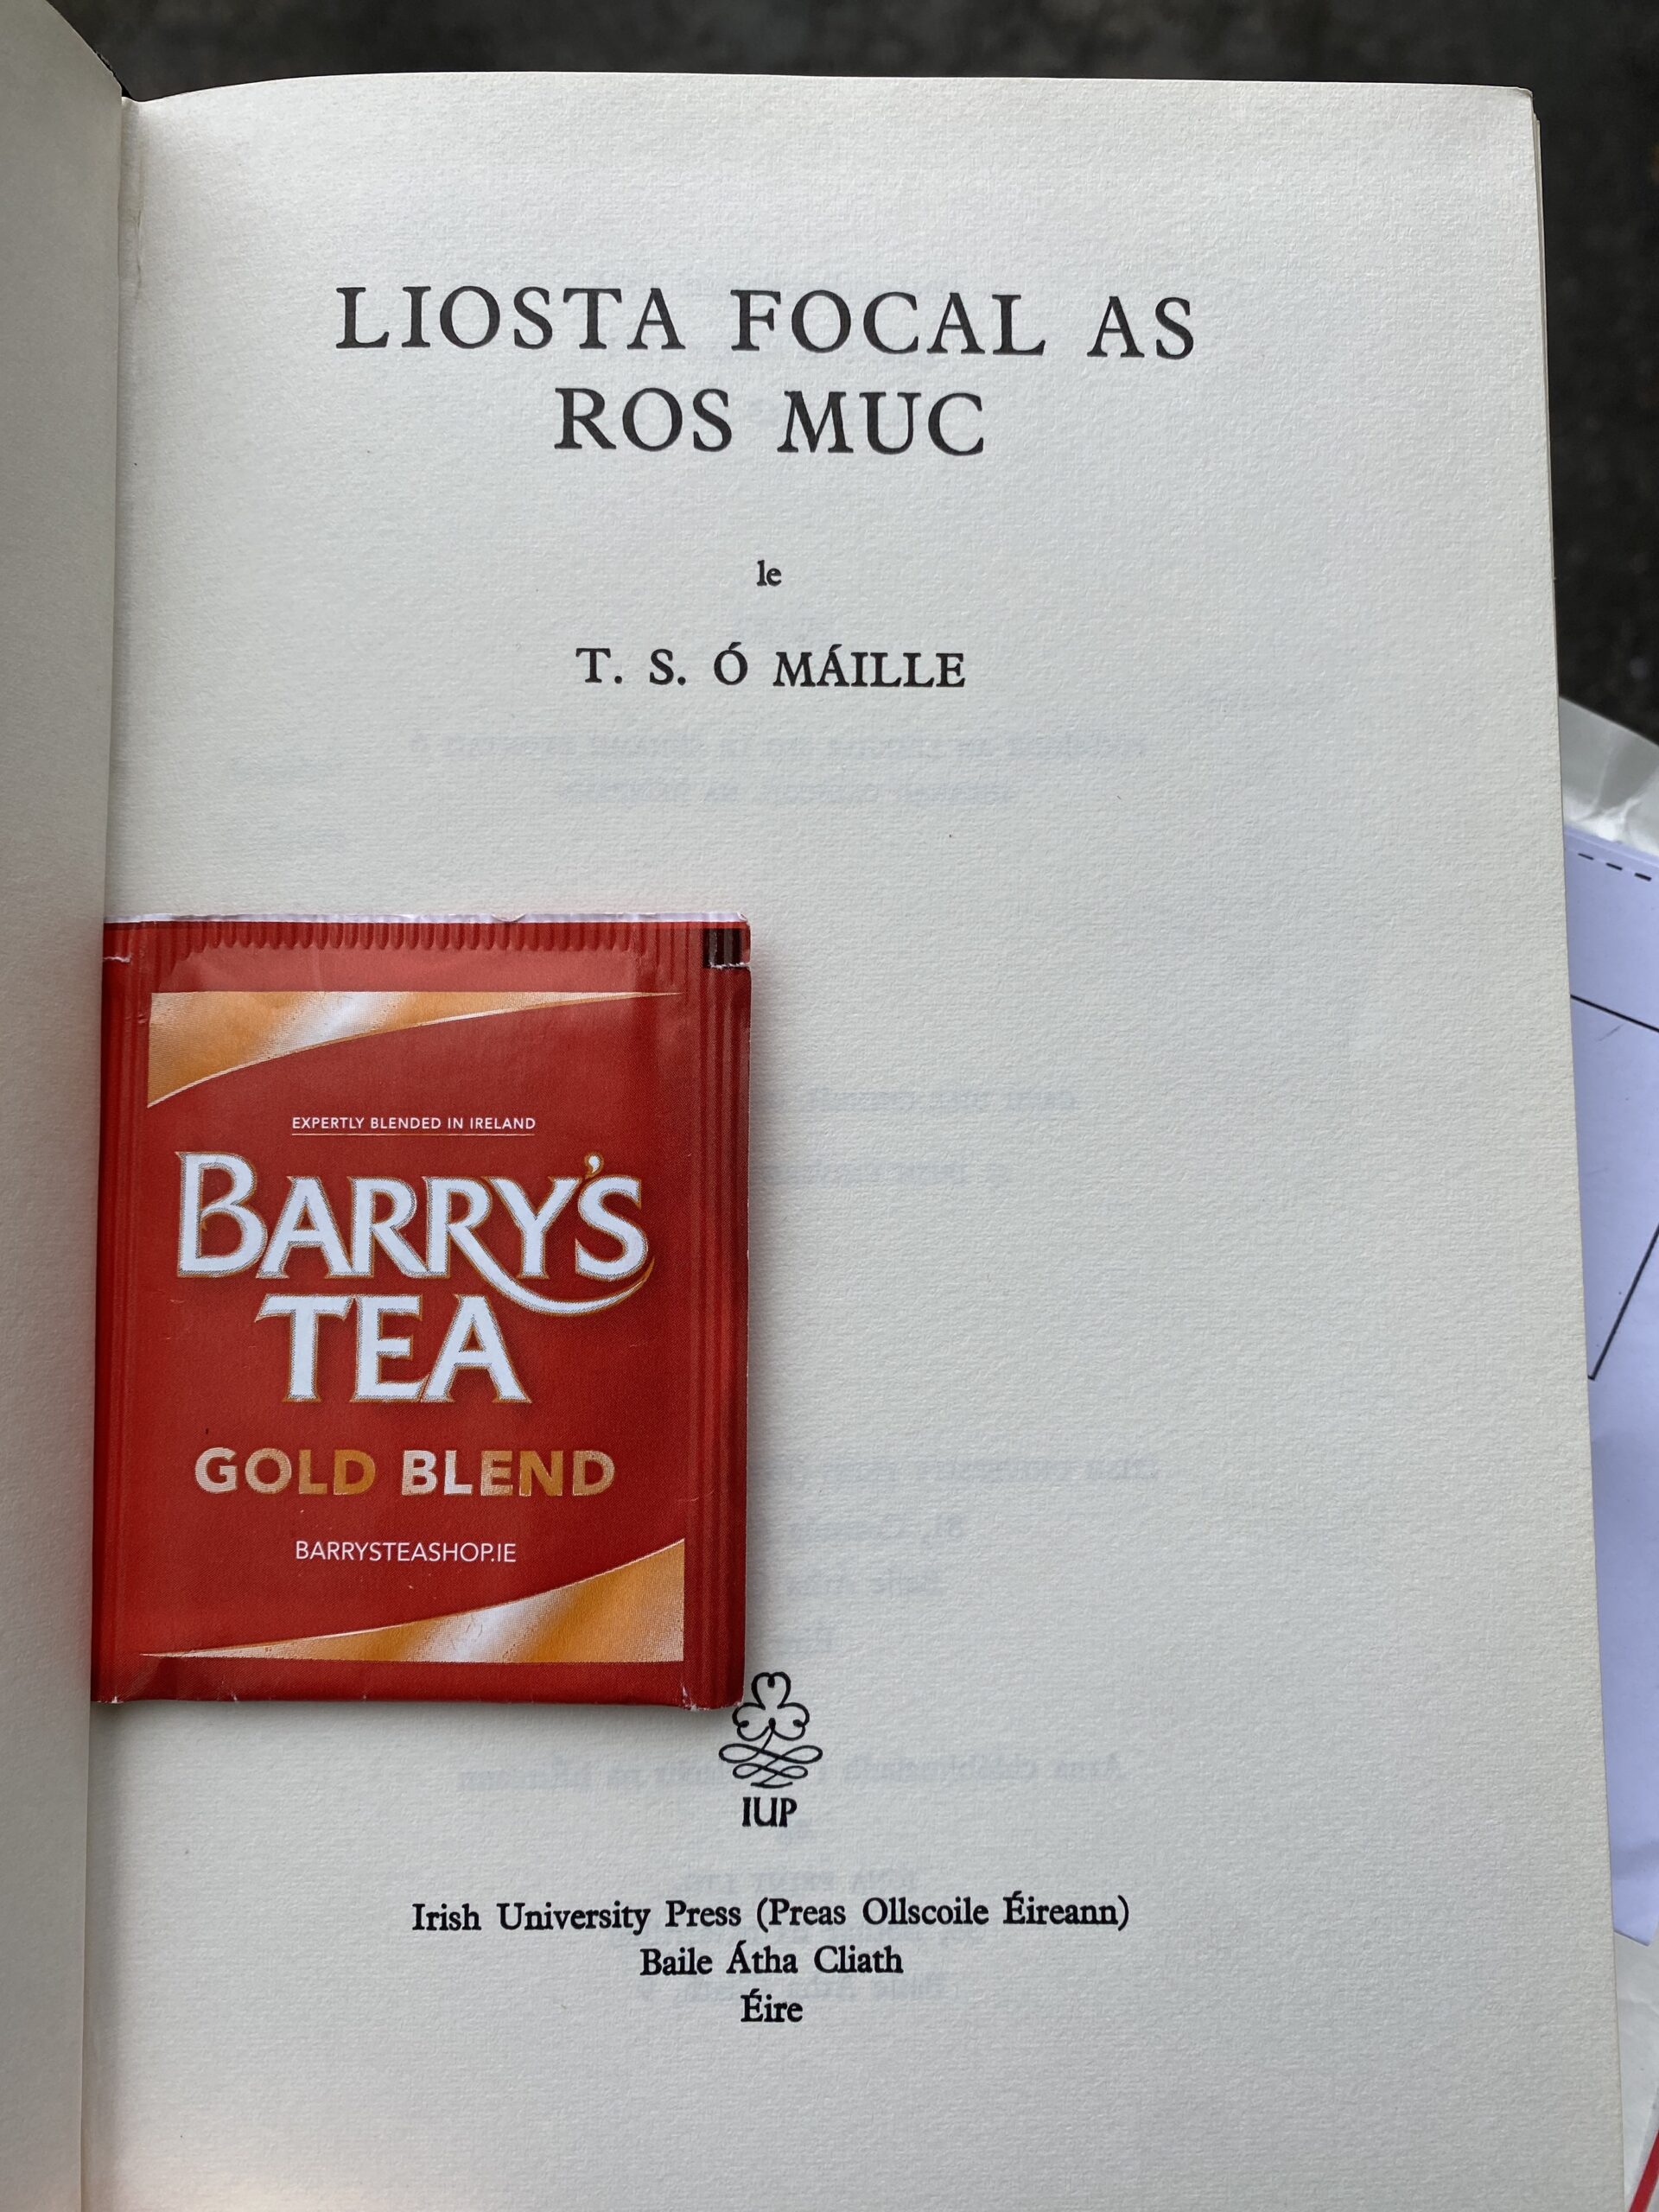 Picture of the book 'Liosta Focal as Ros Muc'